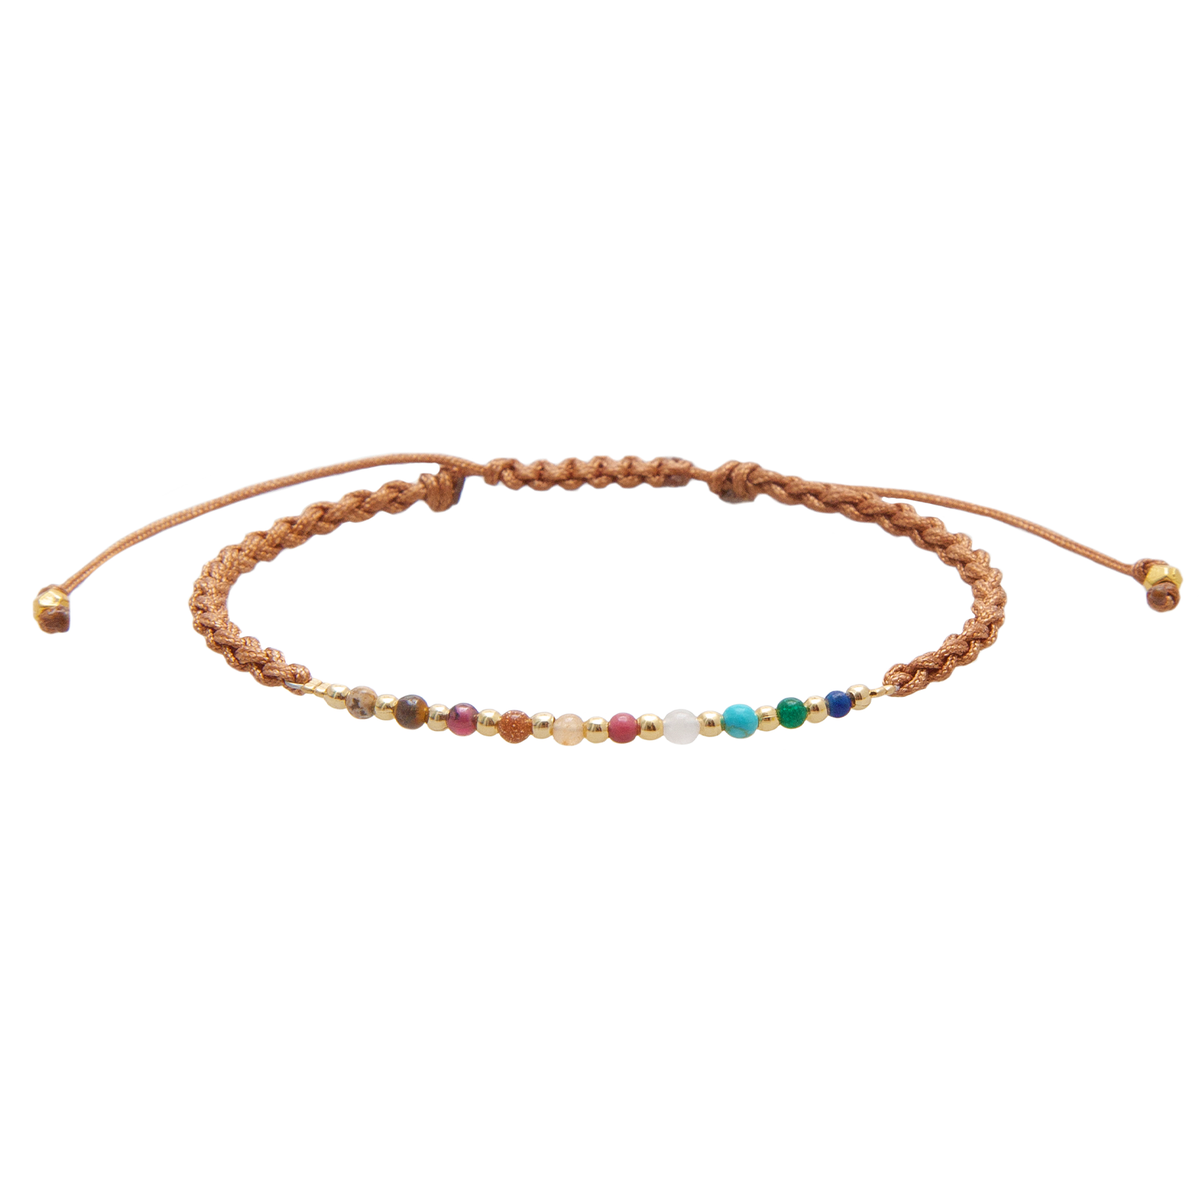 2mm multicolor stone and gold bead bracelet on a brown cotton braided cord